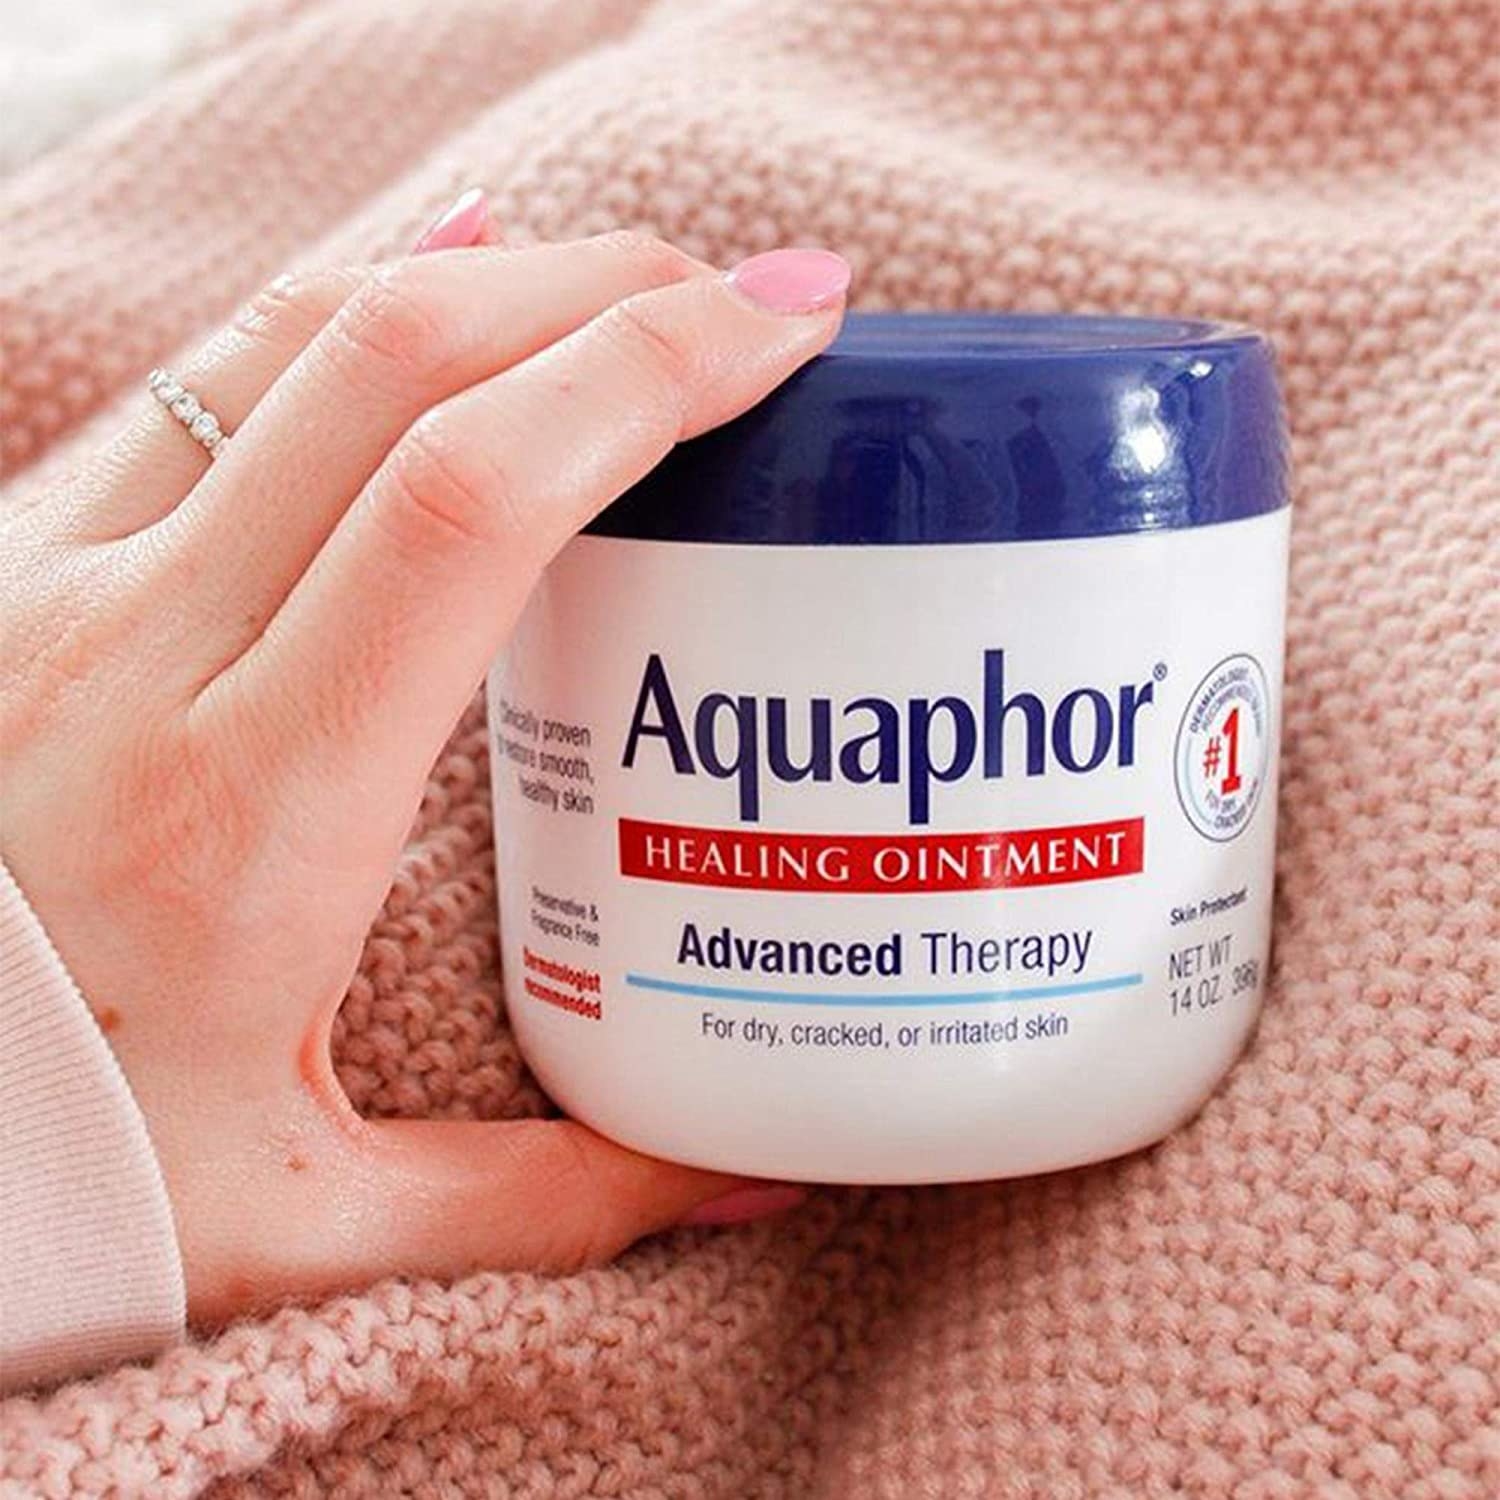 Jar of Aquaphor Advanced Therapy Healing Ointment